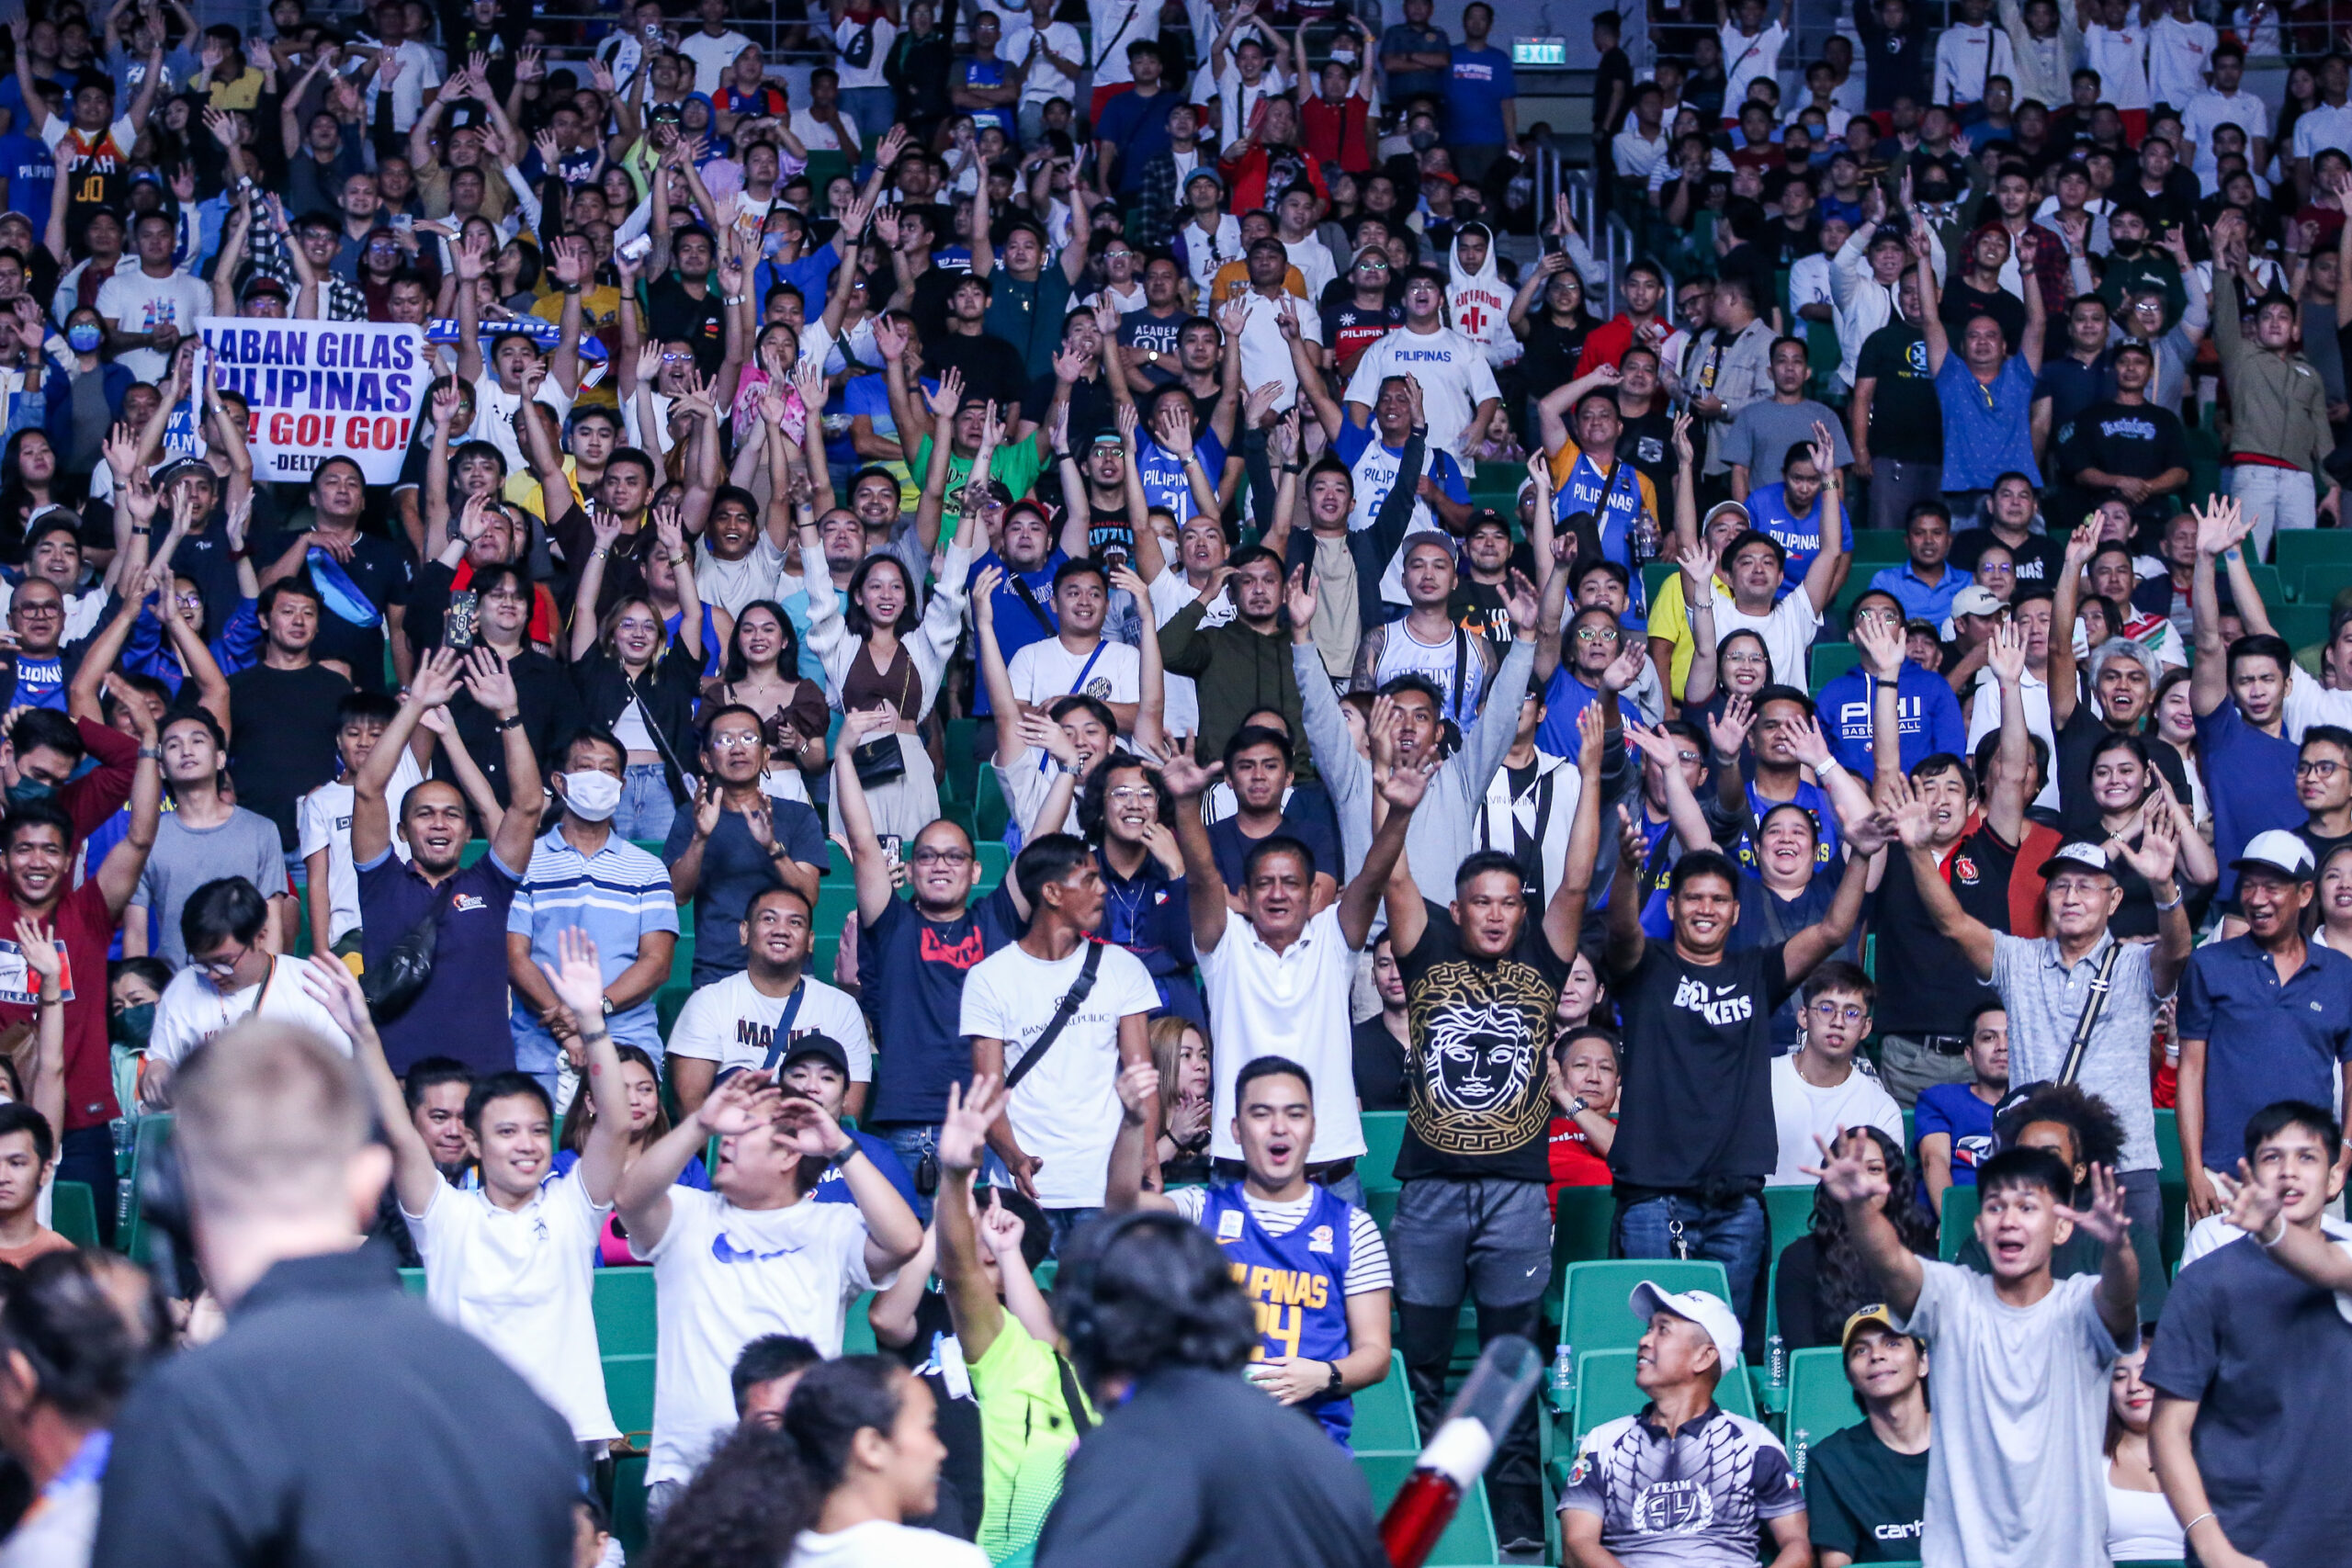 Philippines sets new Fiba World Cup attendance record with 38,115